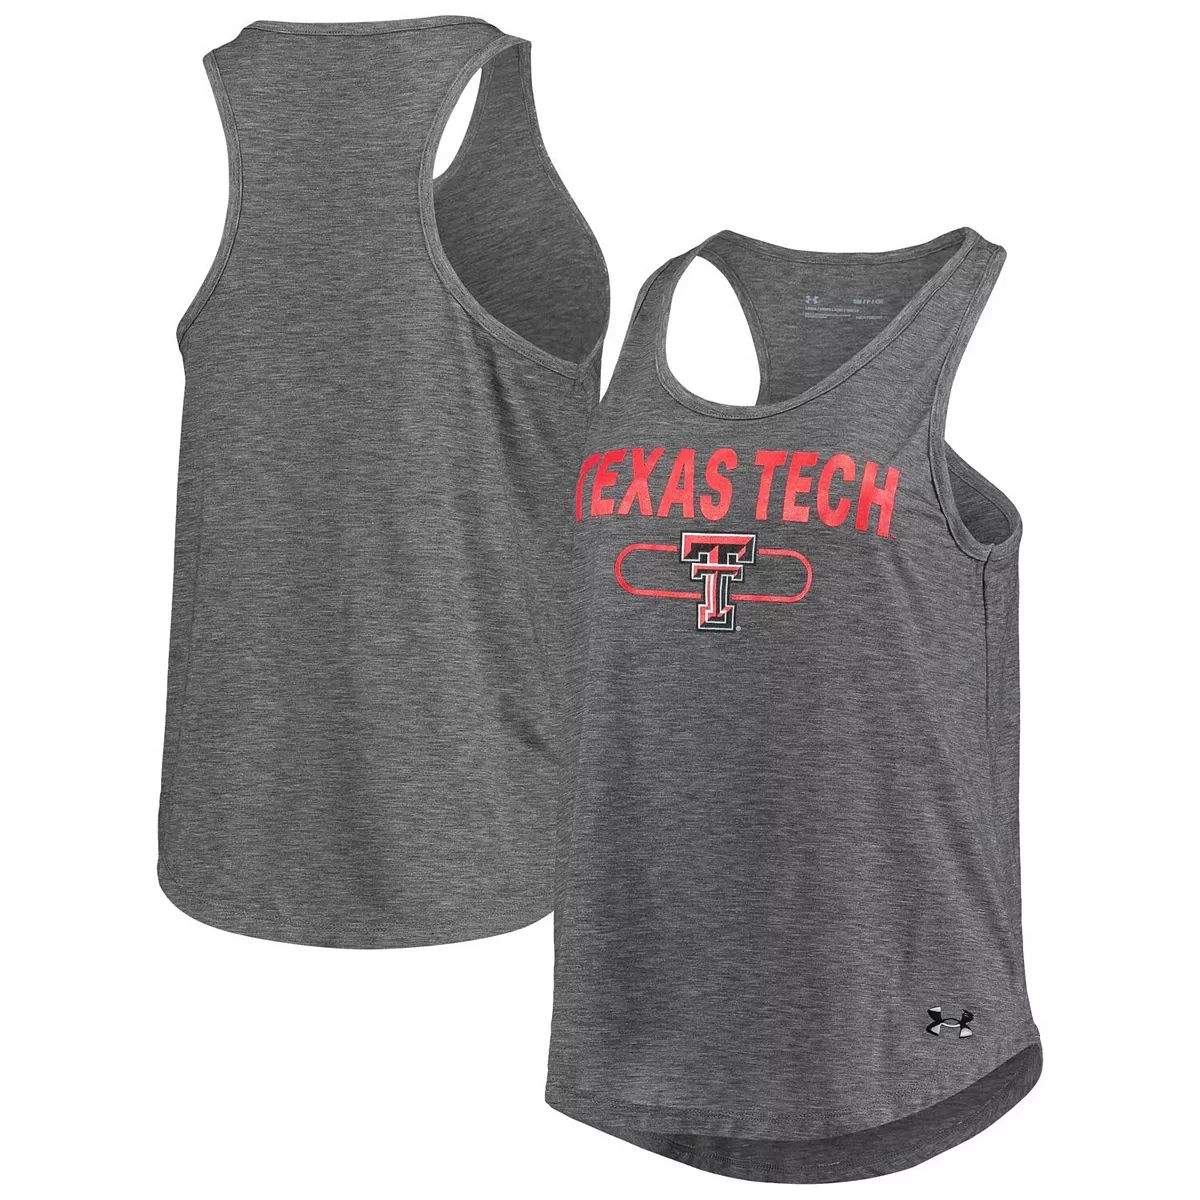 Women's Under Armour Heathered Charcoal Texas Tech Red Raiders Tri-Blend Performance Tank Top | Kohl's